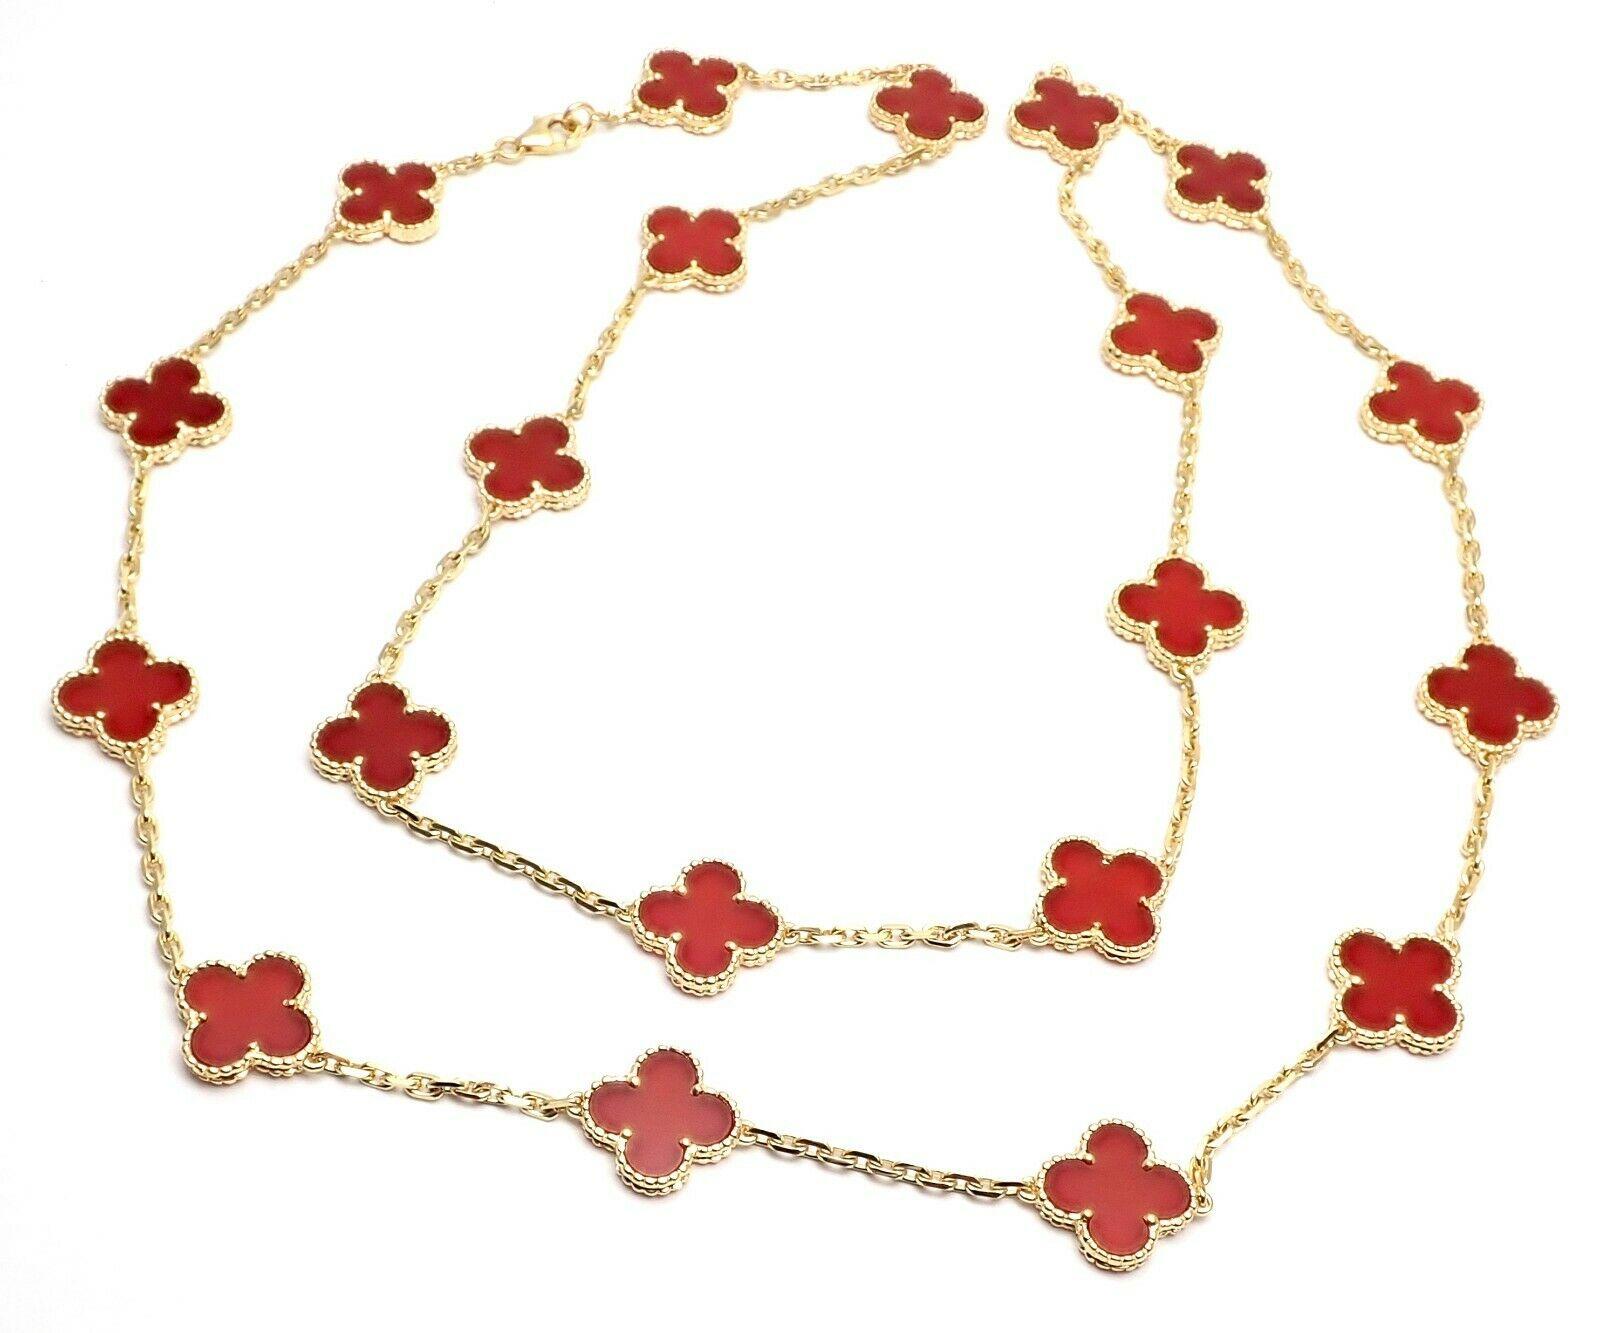 18k Yellow Gold Alhambra 20 Motifs Carnelian Necklace by Van Cleef & Arpels. 
With 20 motifs of carnelian Alhambra stones 15mm each.  
This necklace comes with service paper Van Cleef & Arpels store.
Details: 
Length: 32